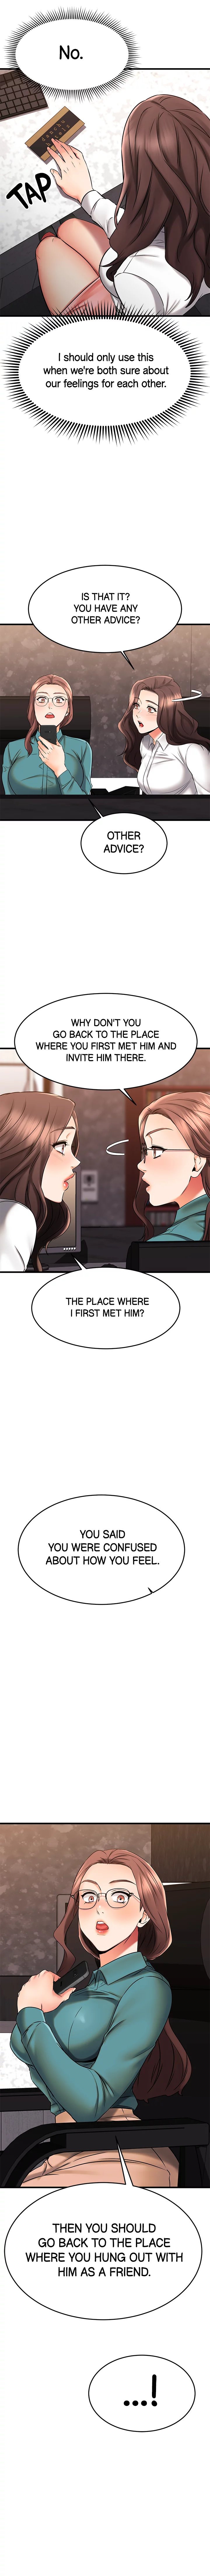 my-female-friend-who-crossed-the-line-chap-38-9